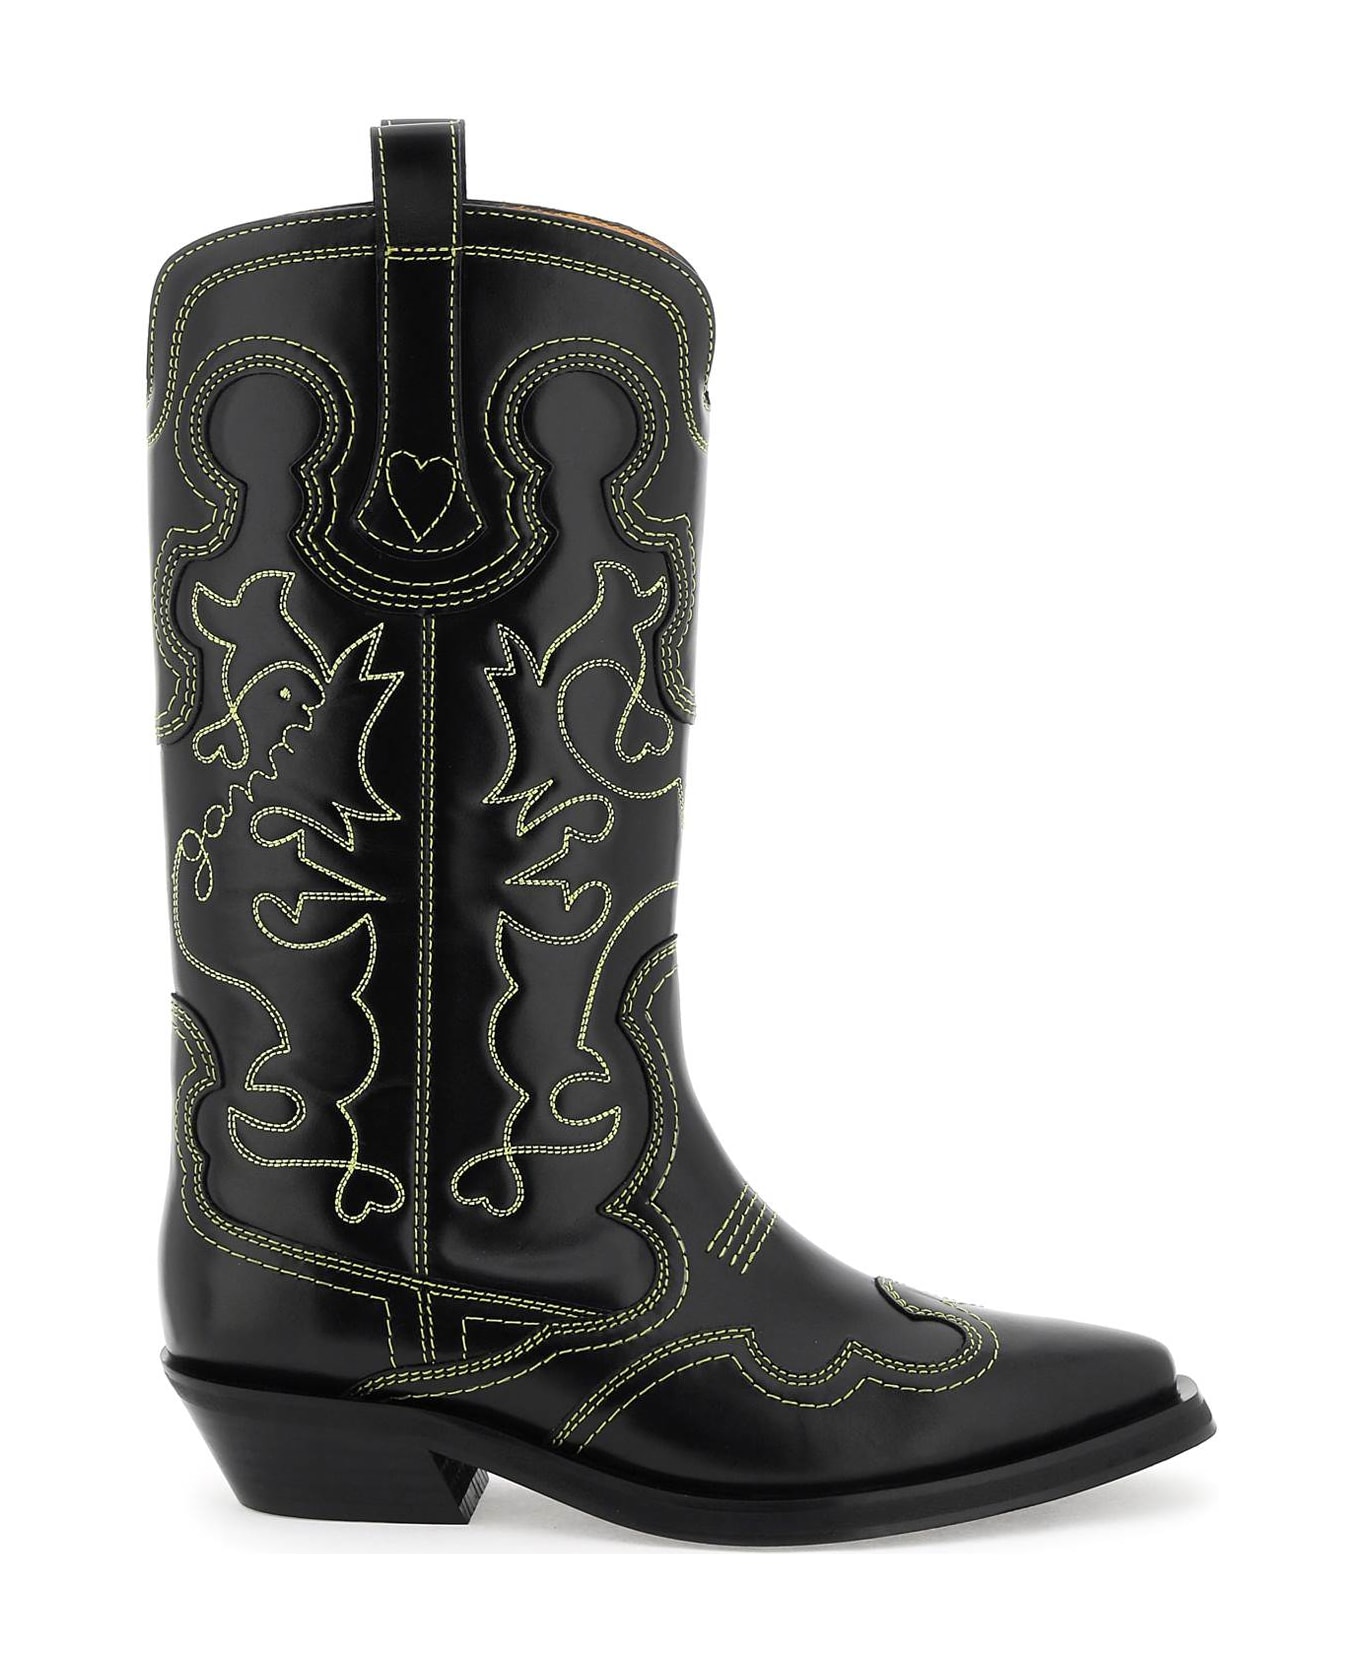 Ganni Embroidered Western Boots - Black ブーツ